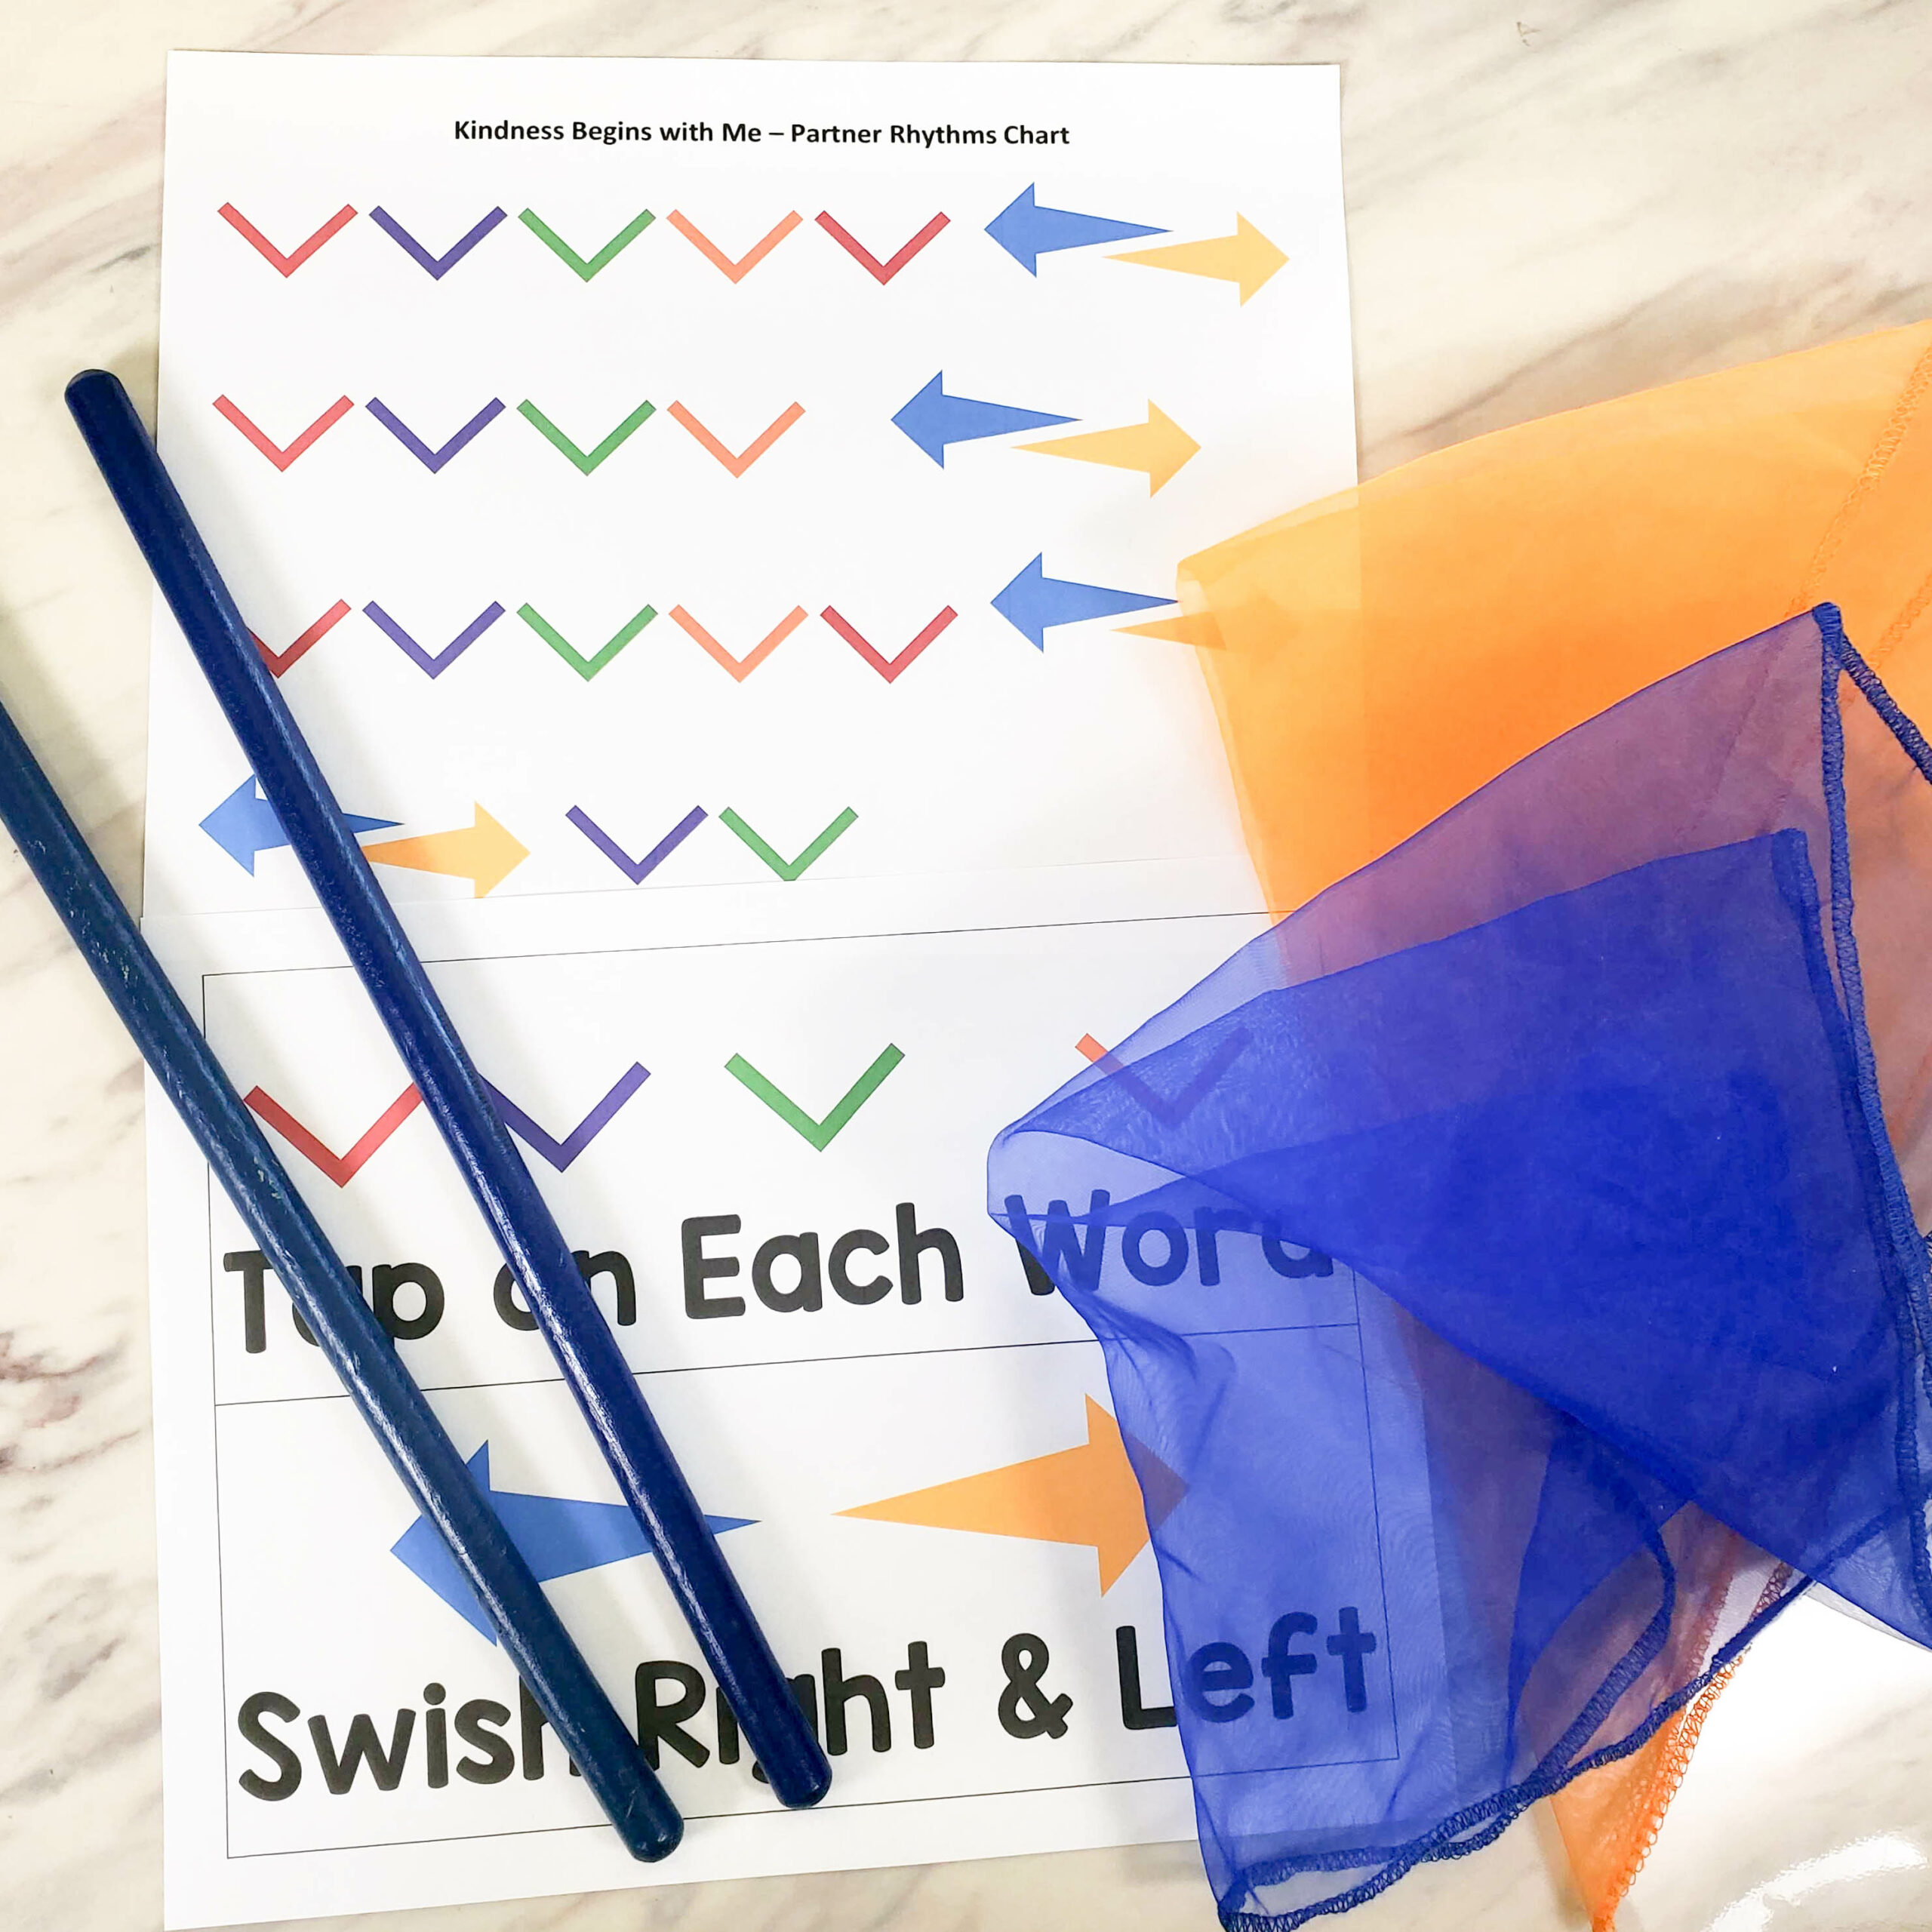 Kindness Begins with Me Partner Rhythms singing time activity! Bring in rhythm sticks and dance scarves (or alternates in the post) to add two different patterns following the melody and rhythm with fun actions! Includes a printable pattern chart for LDS Primary music leaders.